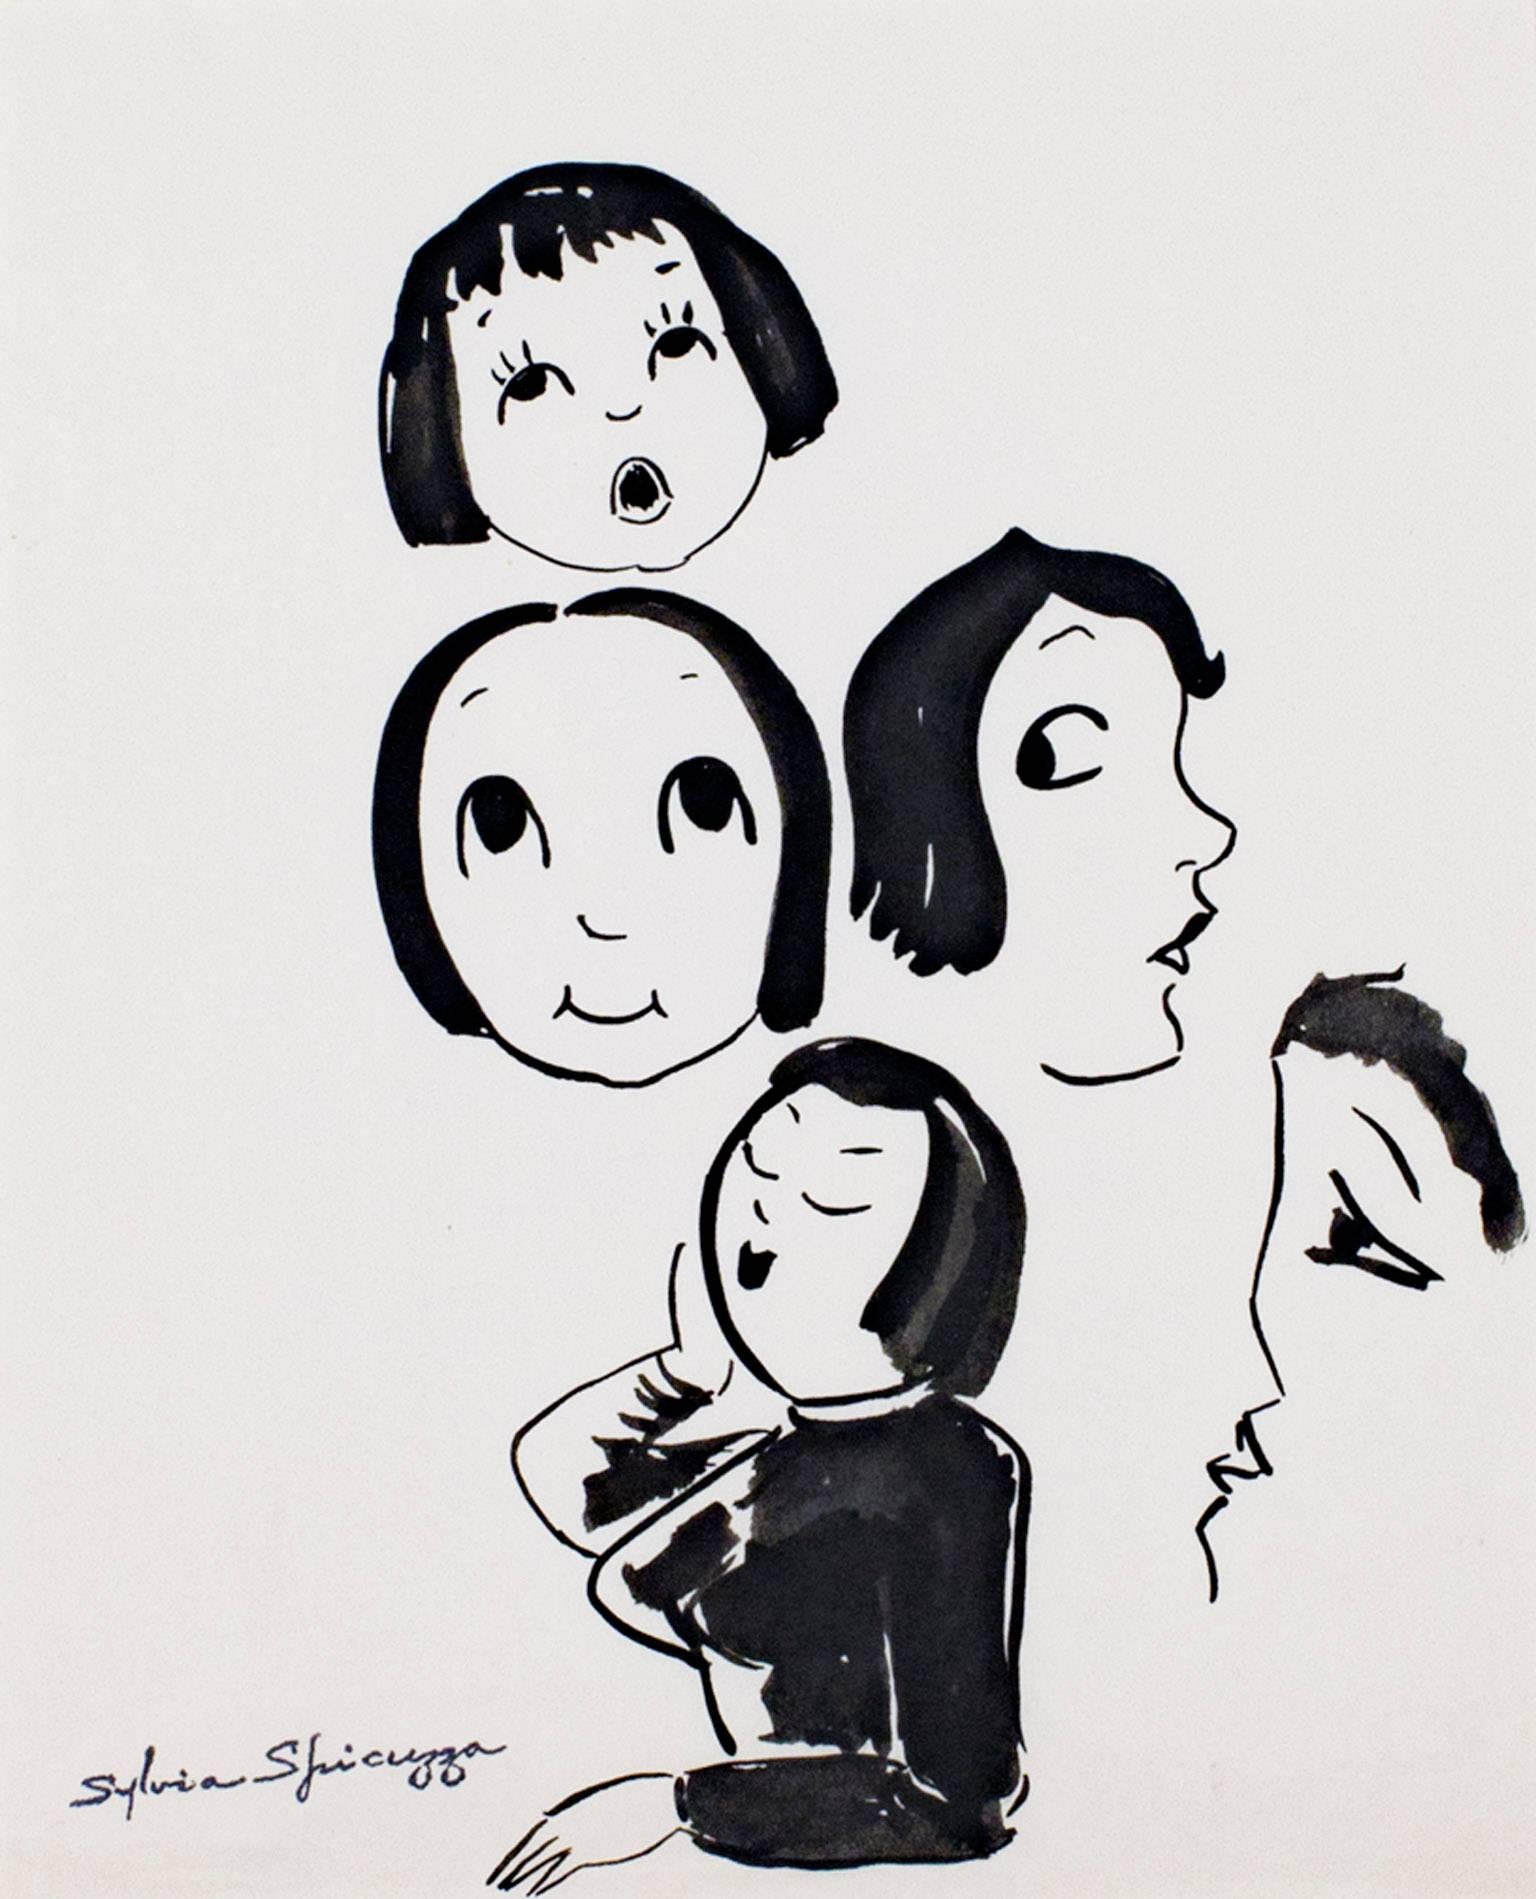 "Five Faces #736" is an original black ink drawing with a stamped signature in the lower left by Sylvia Spicuzza. It depicts five female faces from a variety of angles. 

10 1/2" x 8" art
17 5/8" x 15 1/8" frame

Born in 1908, Sylvia Spicuzza was